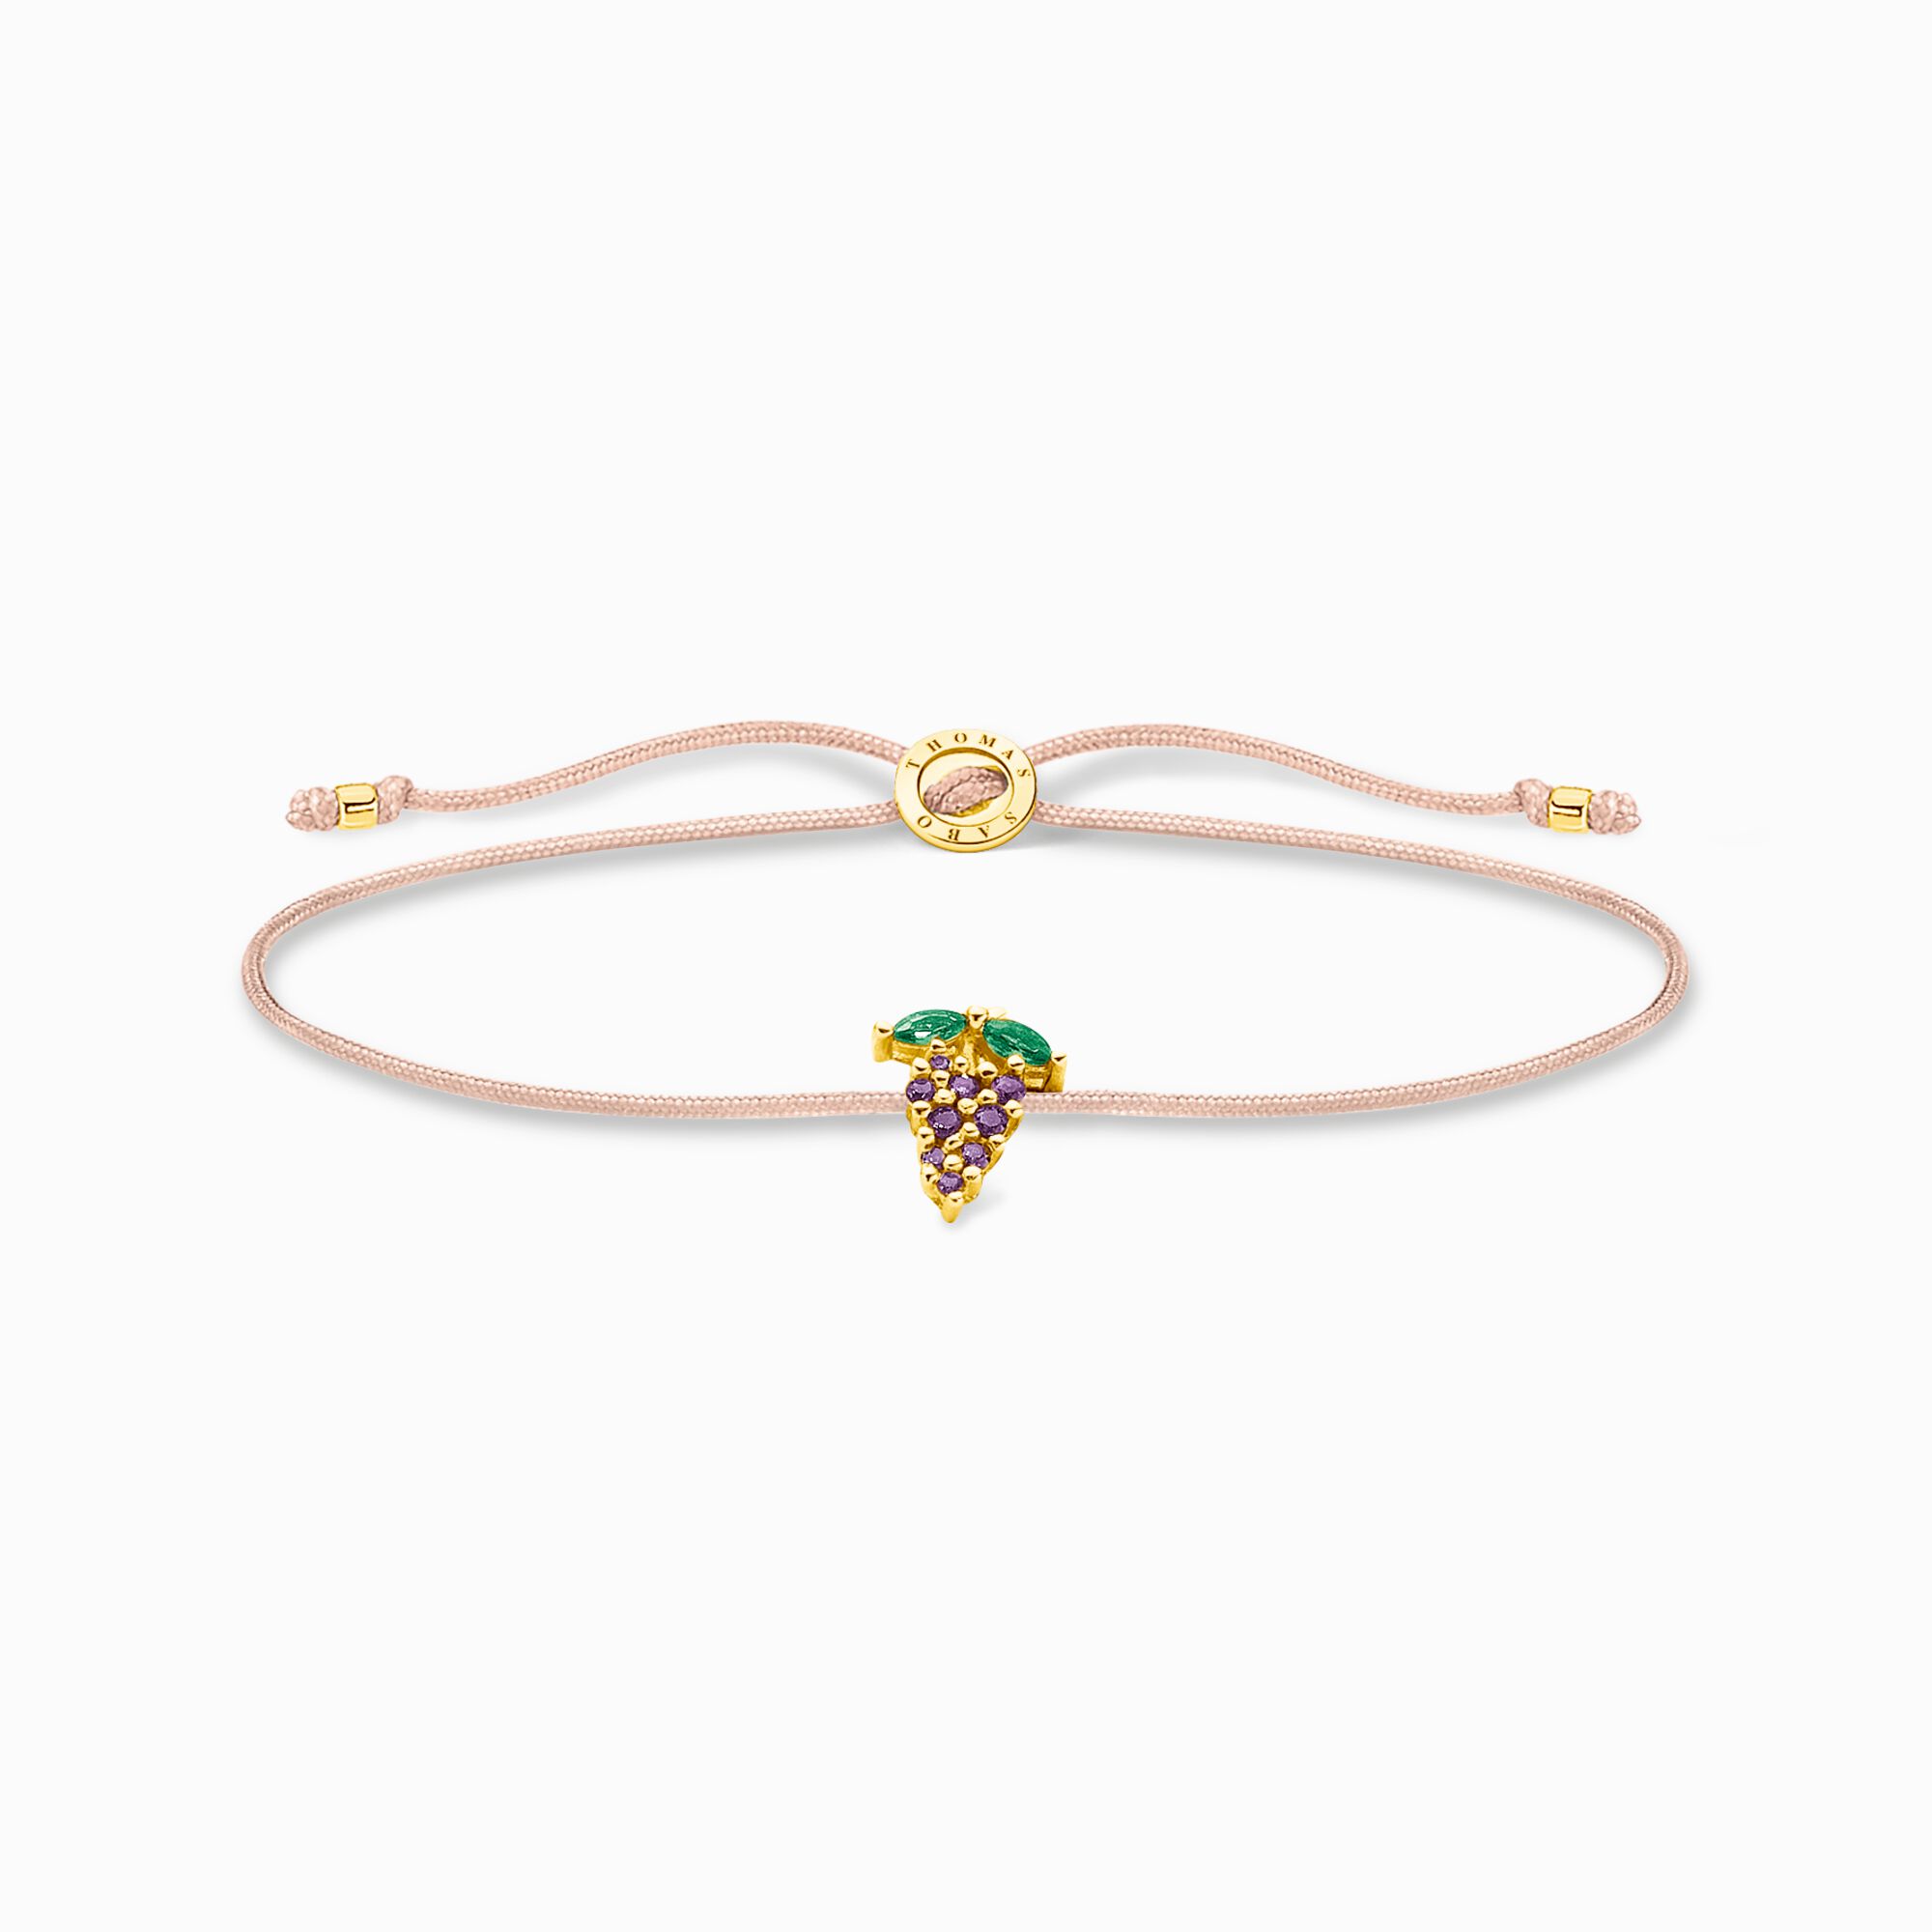 Bracelet Little Secret grape gold from the Charming Collection collection in the THOMAS SABO online store